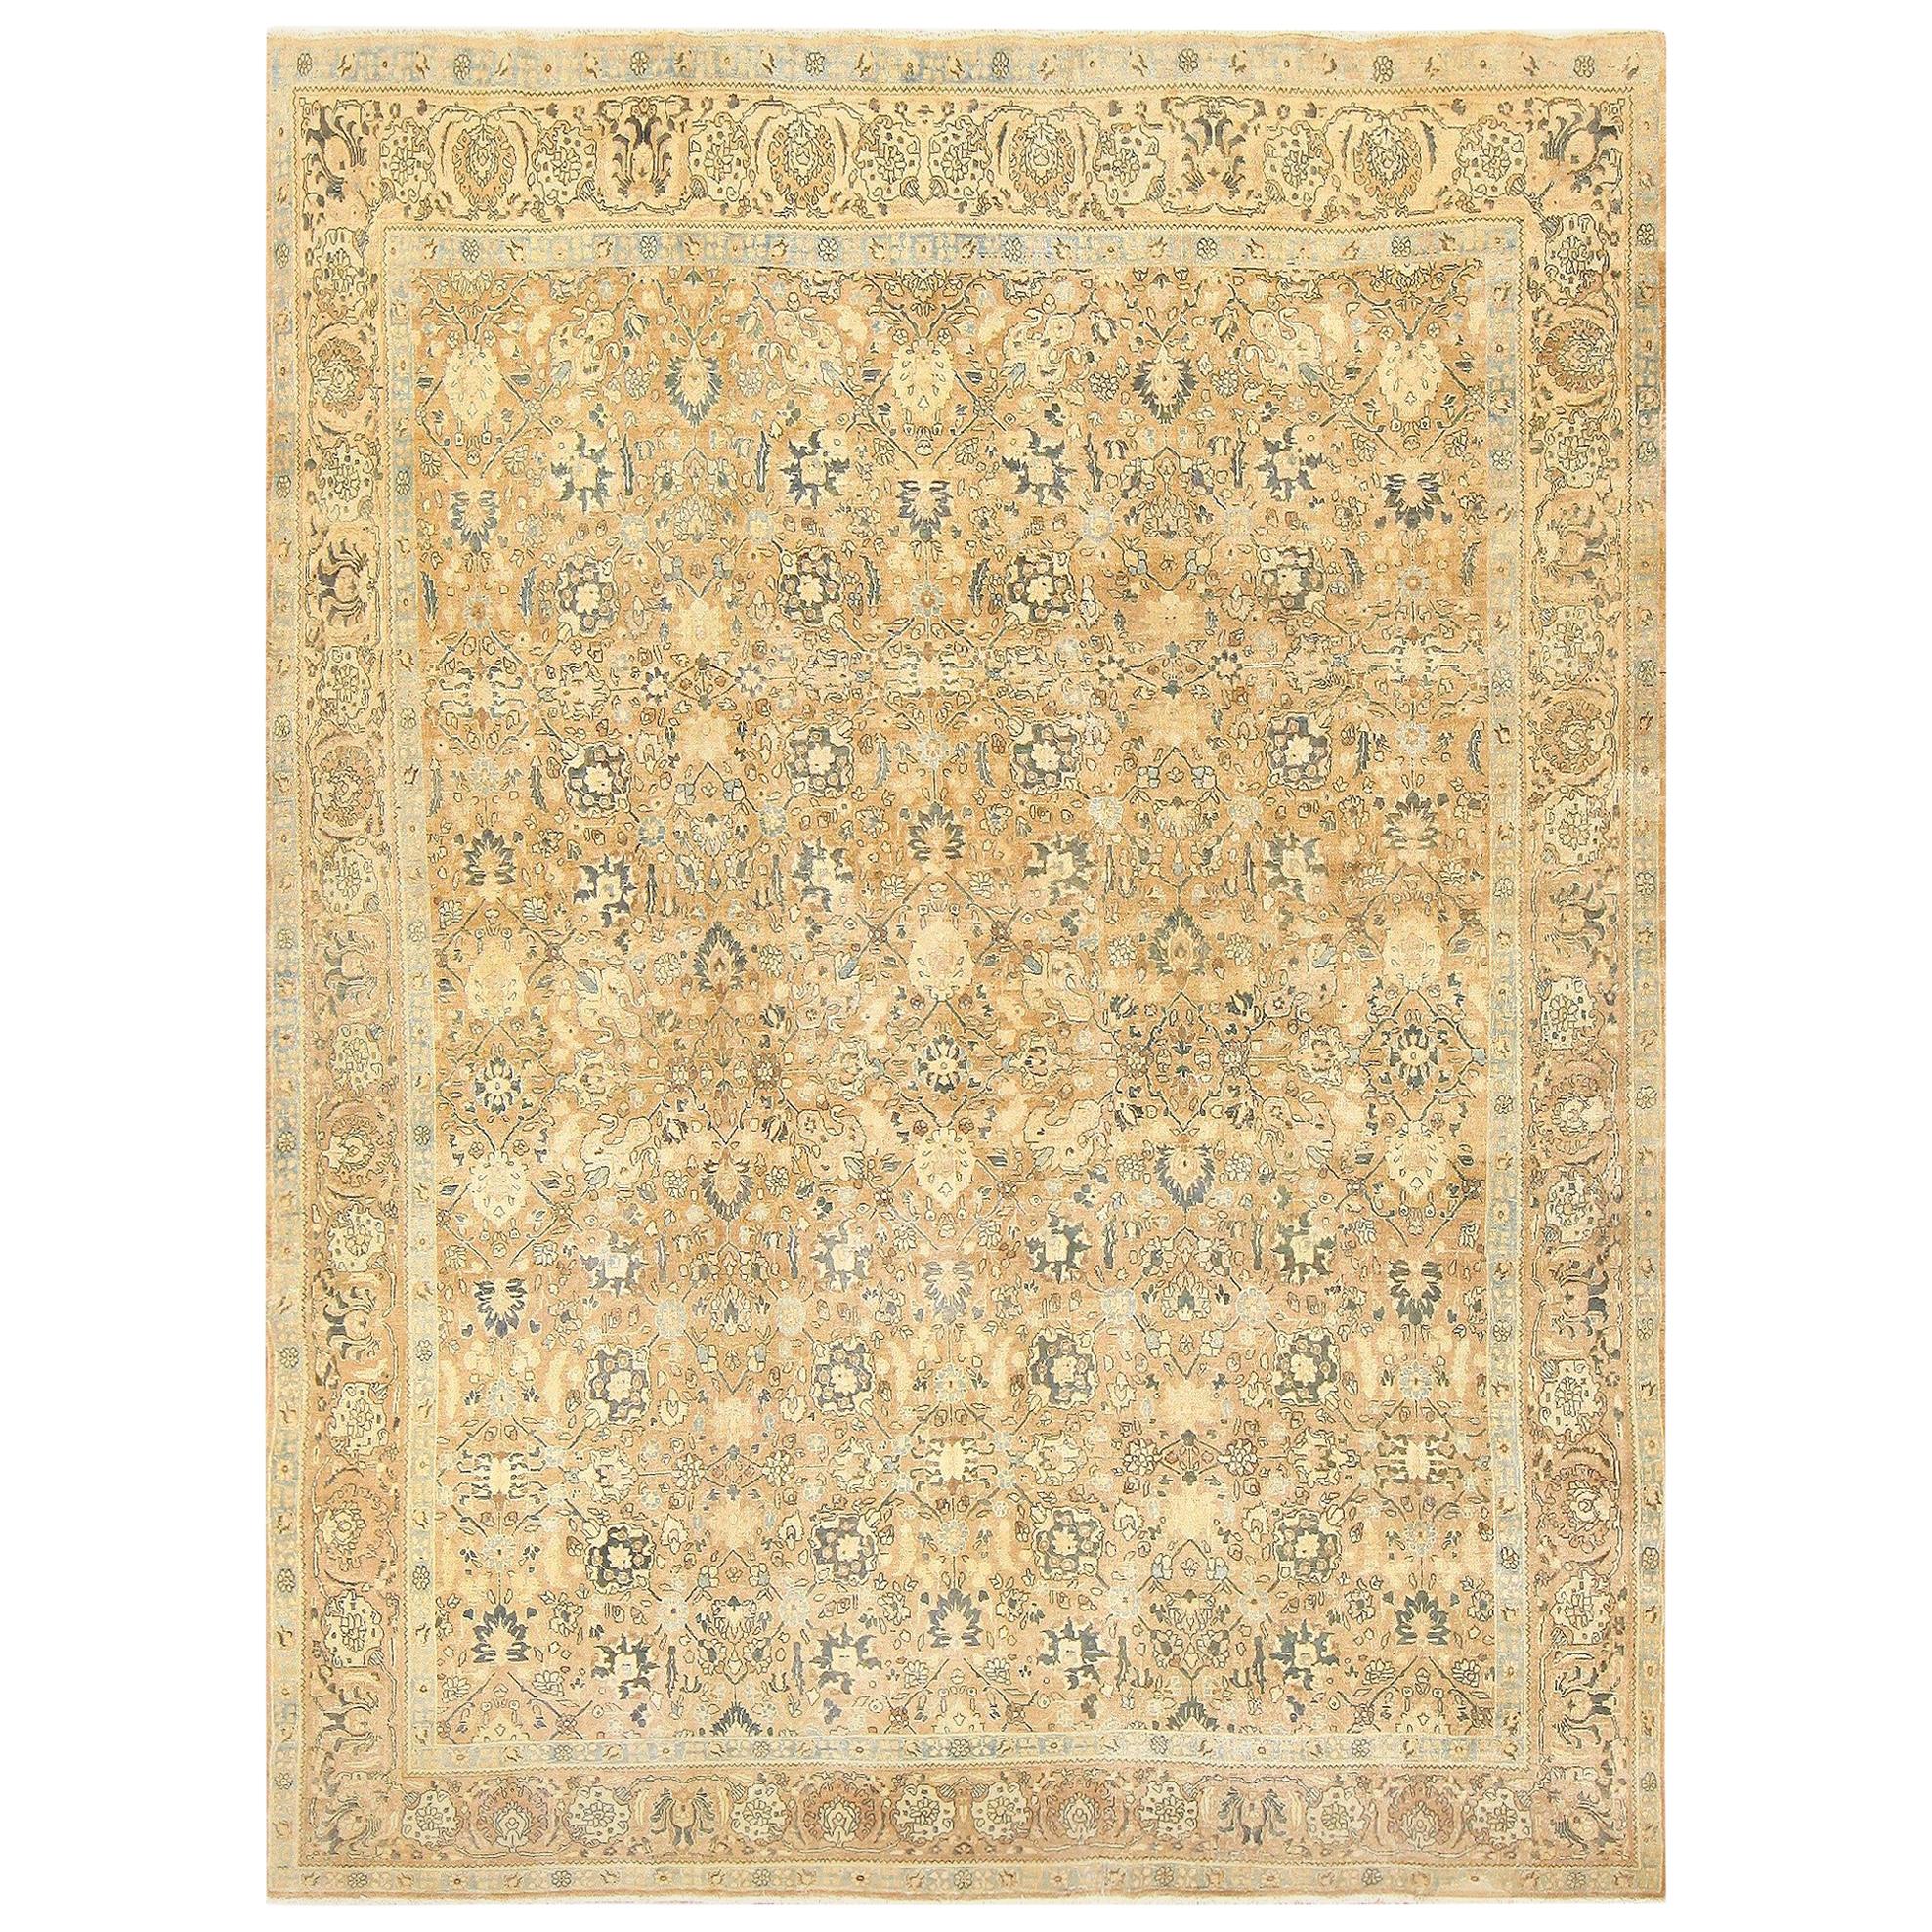 Nazmiyal Collection Antique Persian Khorassan Carpet. 10 ft 10 in x 13 ft 7 in